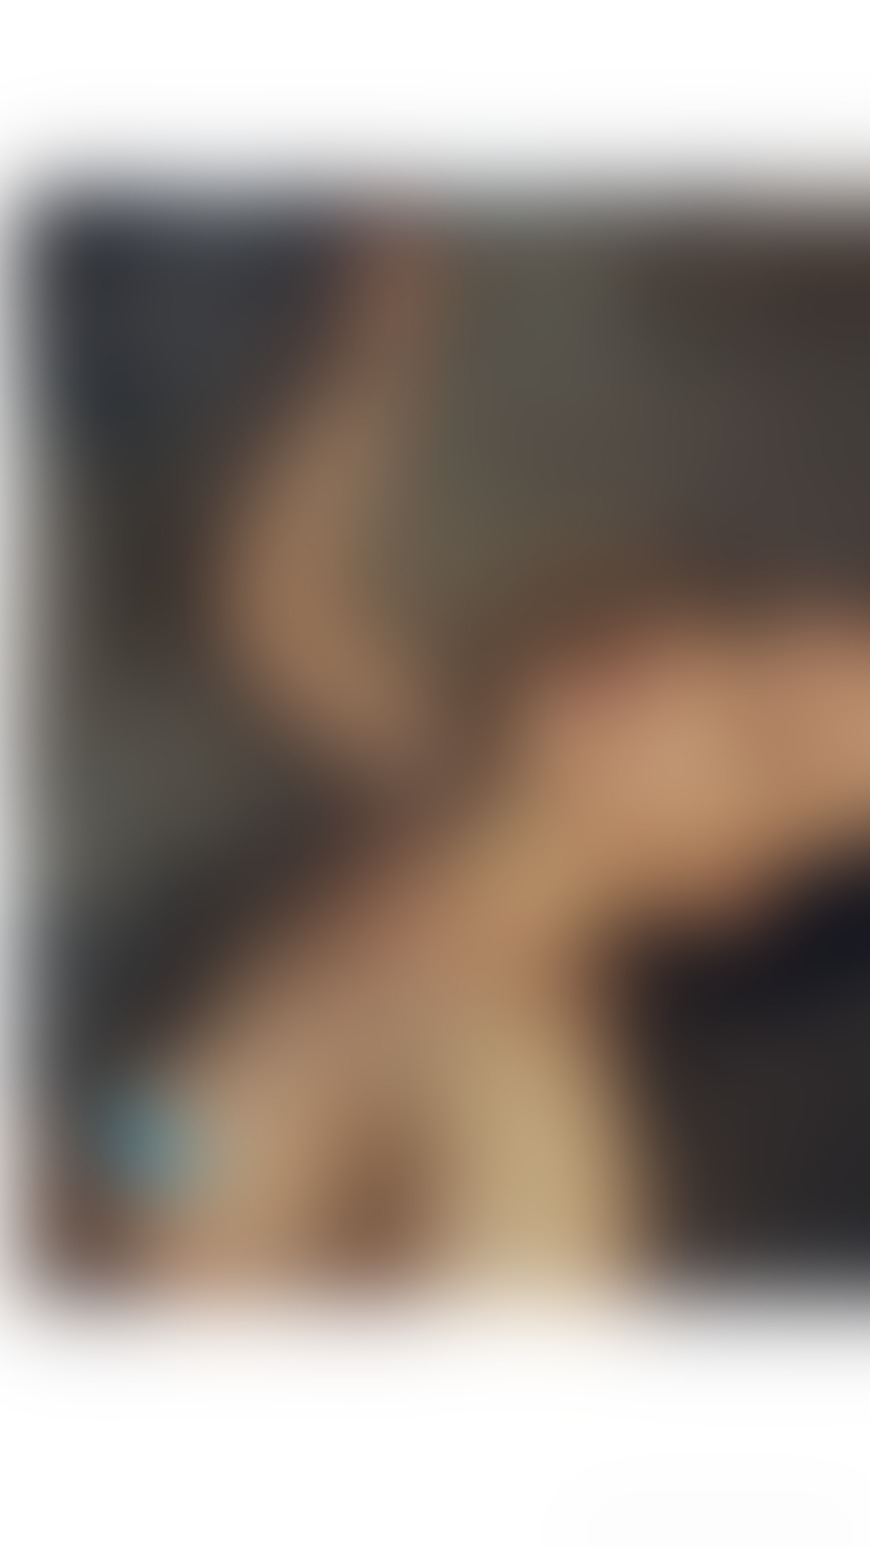 A Sneak Peak Gift to My Followers Only - post hidden image